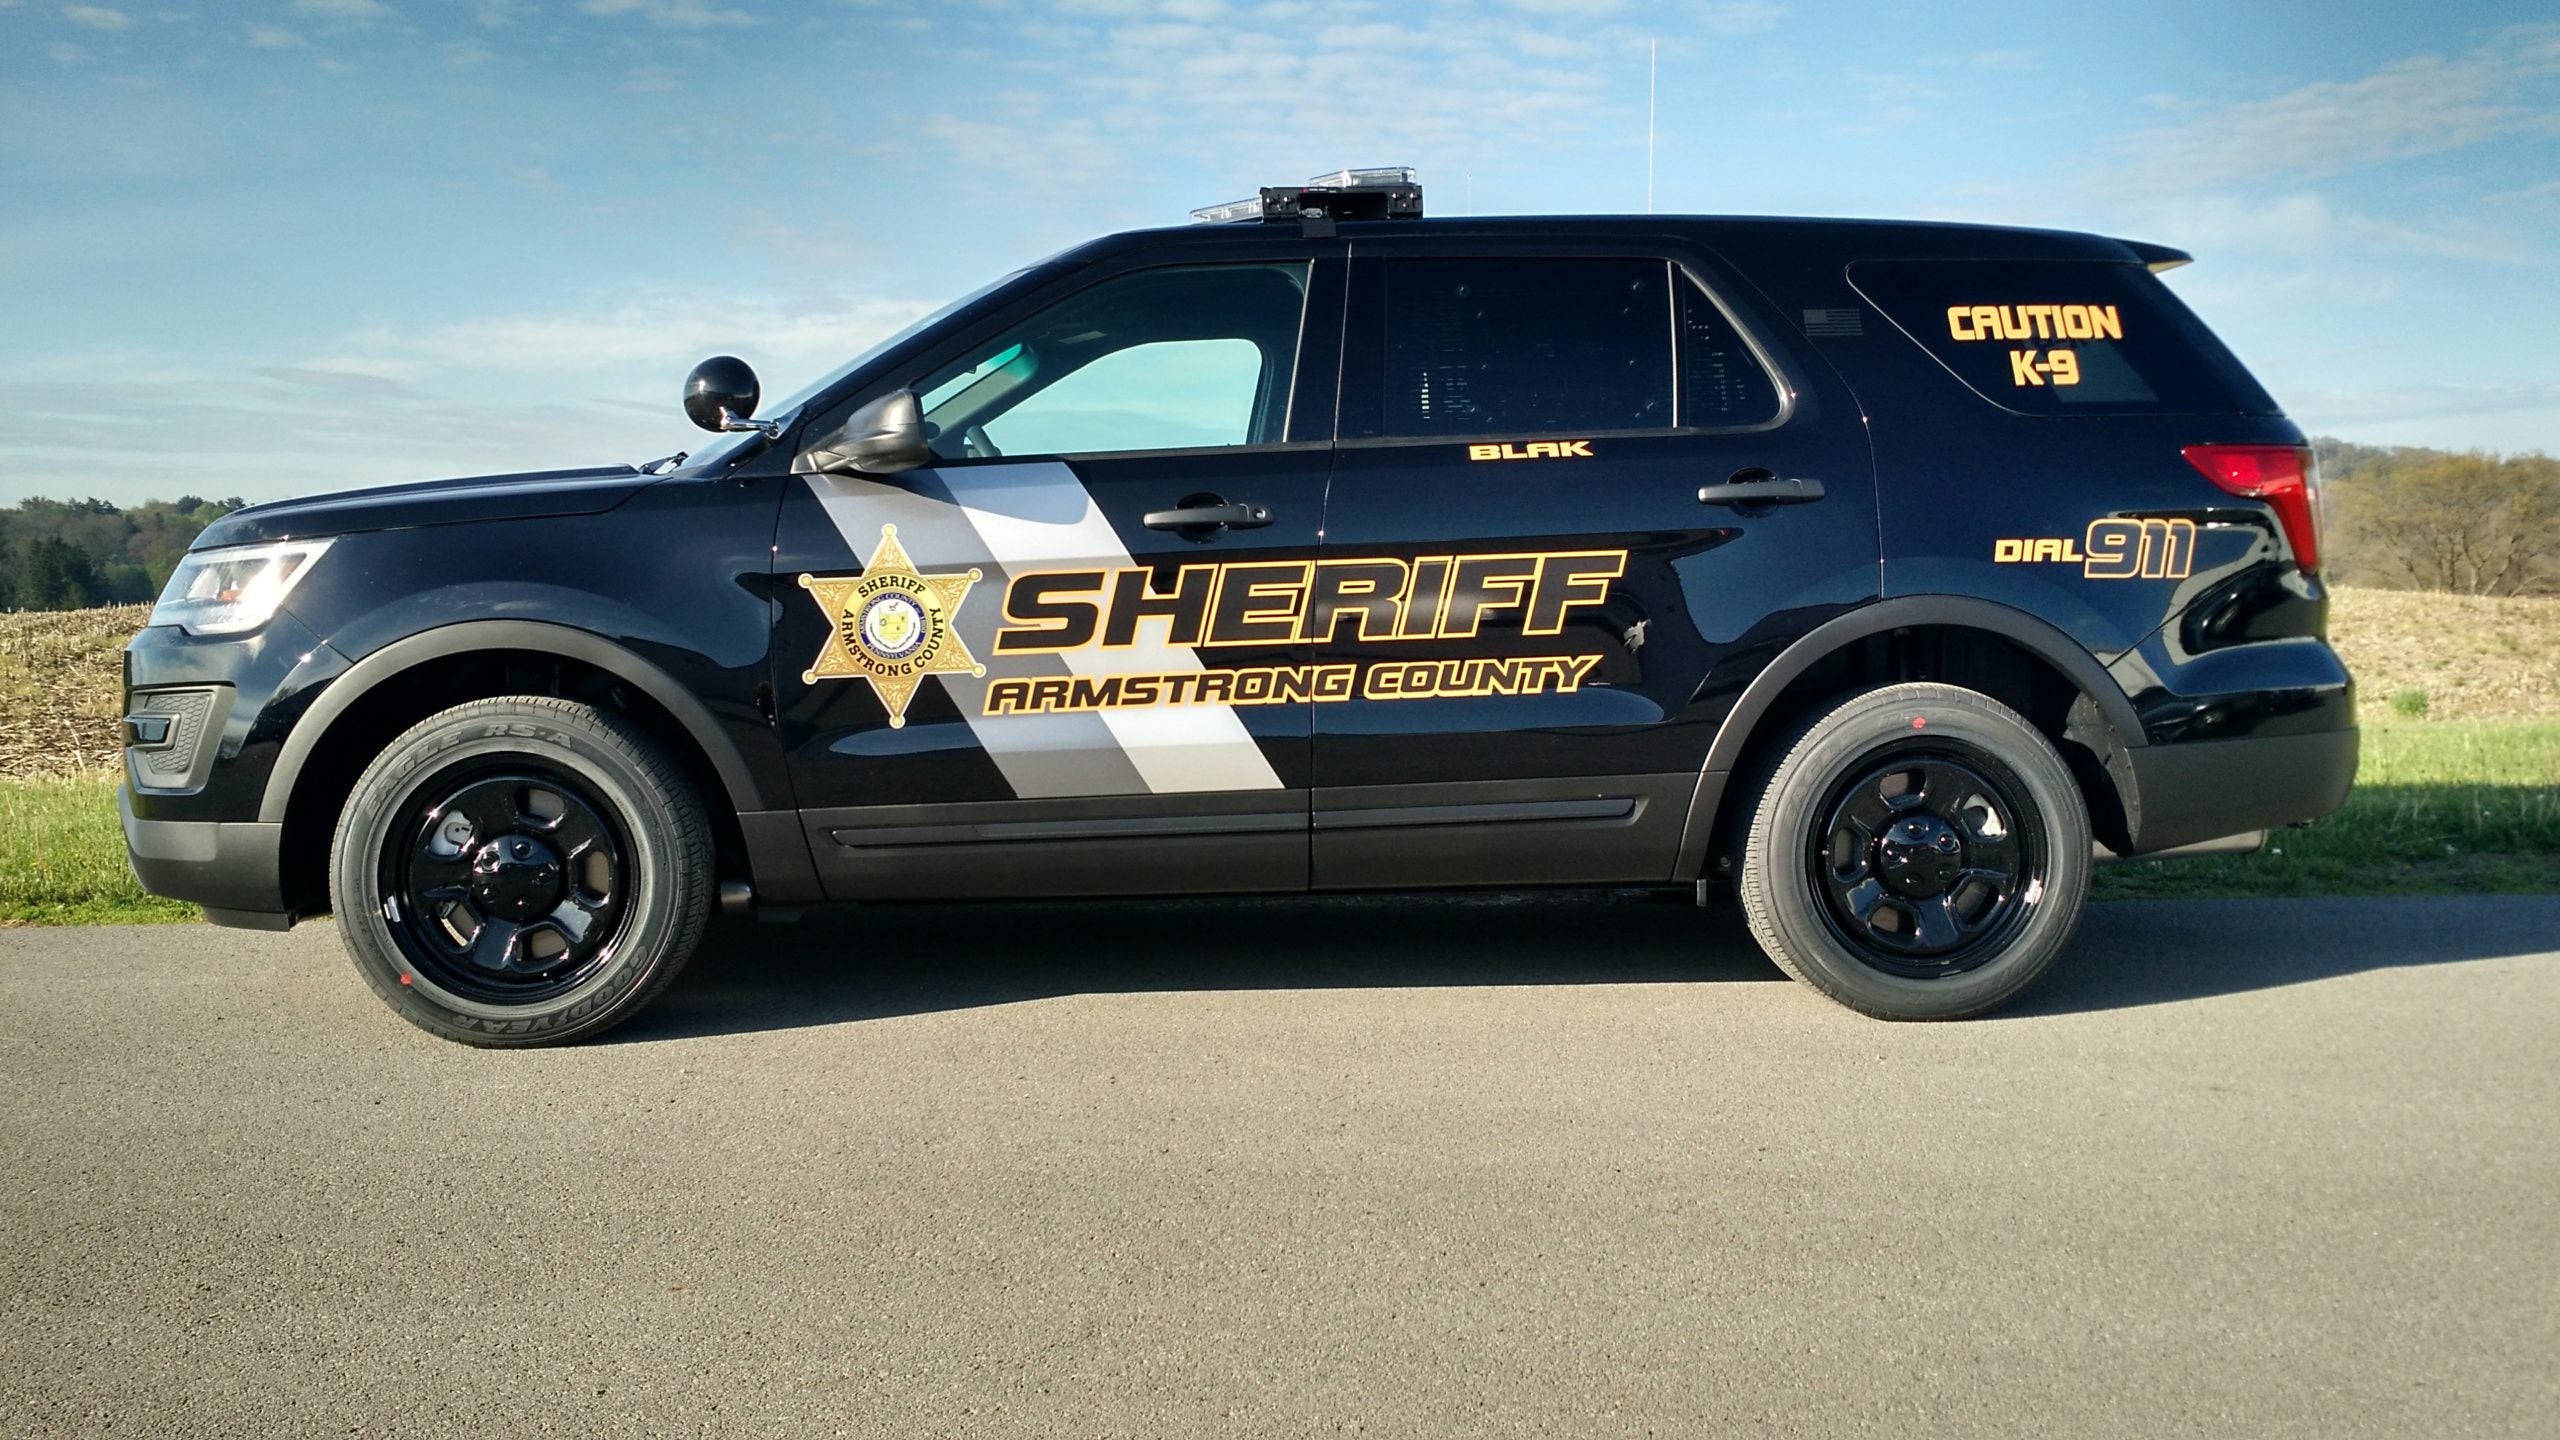 Armstrong County Sheriff